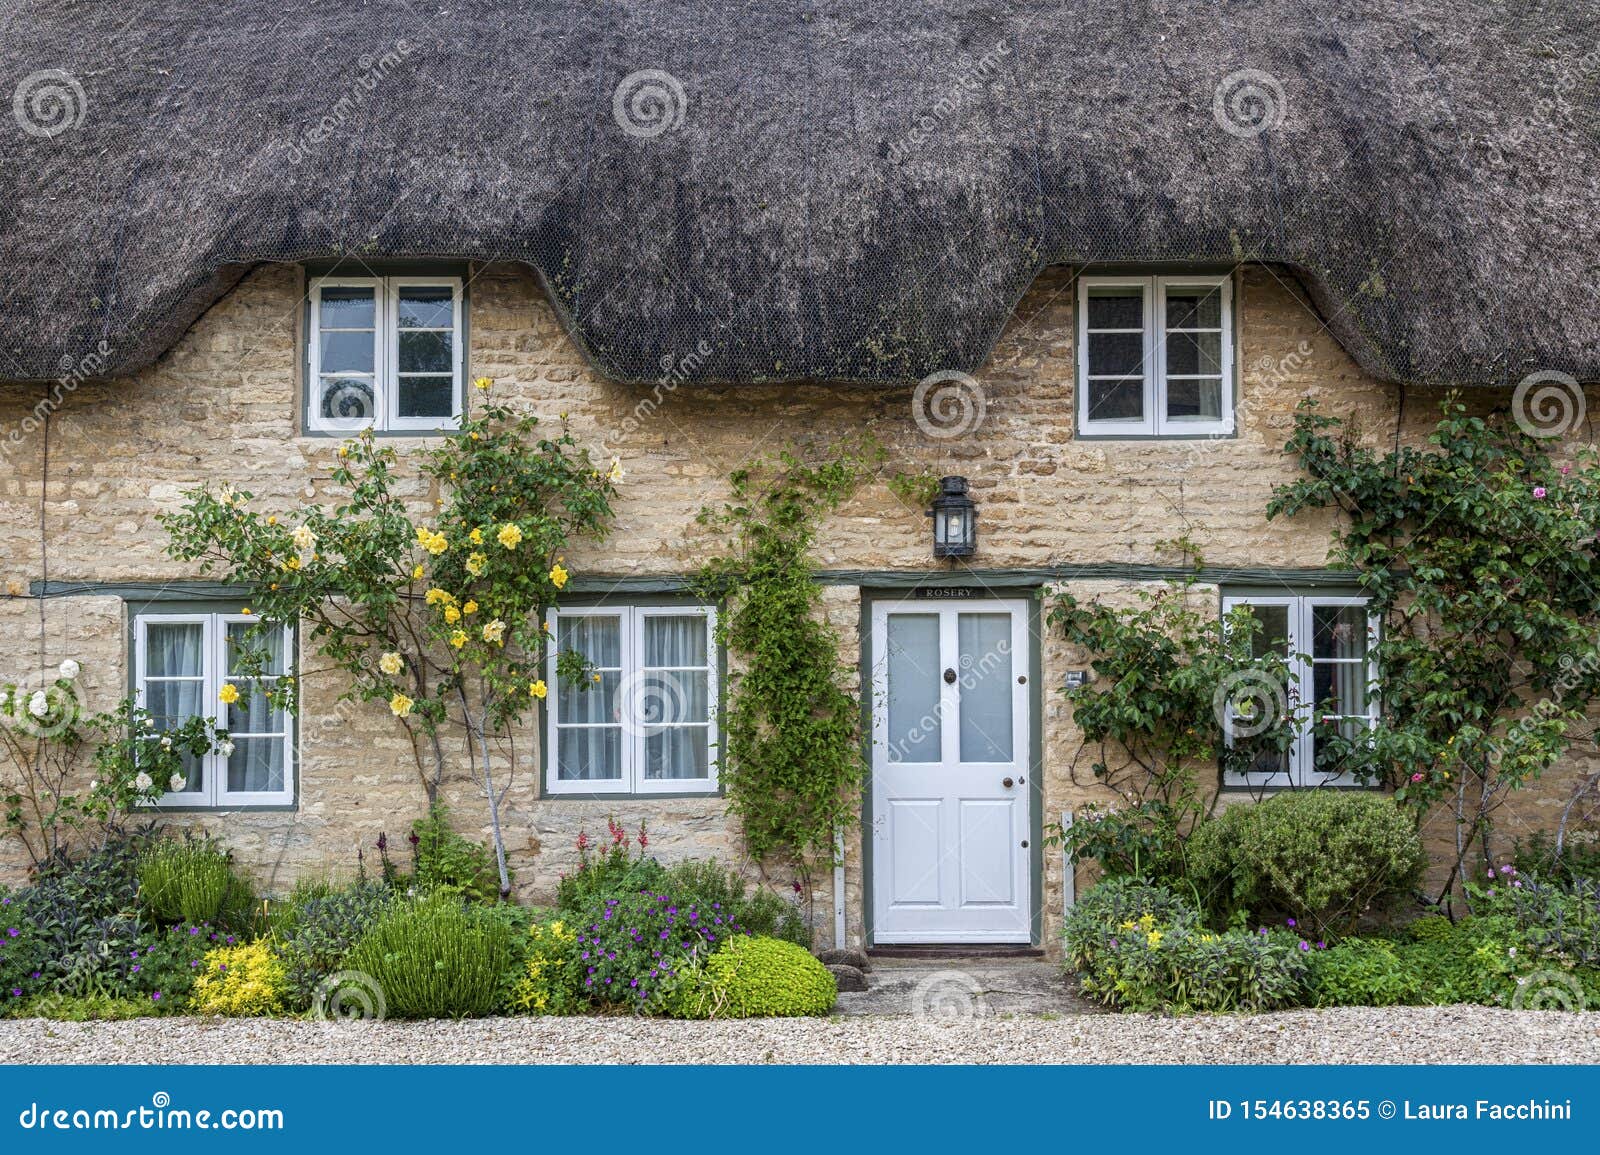 Narrow Lane With Romantic Thatched Houses And Stone Cottages In